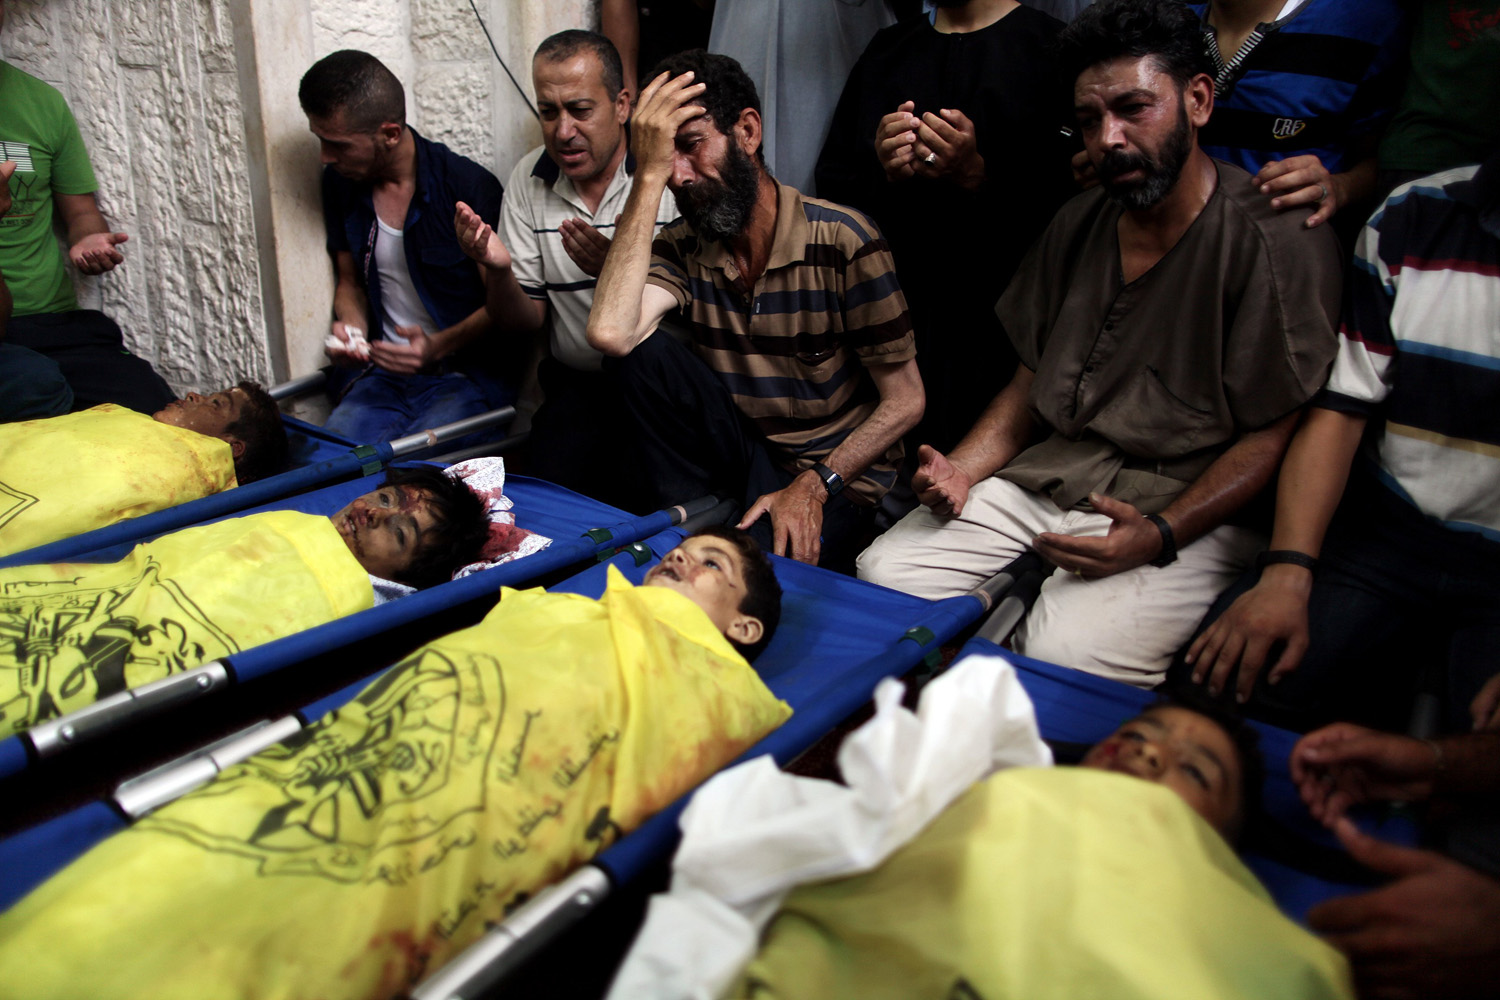 PALESTINIANS MOURN OVER THE BODY OF BOYS FROM THE BAKER FAMILY, WHOM MEDICS SAID WAS KILLED WITH THREE OTHER CHILDREN FROM THE SAME FAMILY BY A SHELL FIRED BY AN ISRAELI NAVAL GUNBOAT